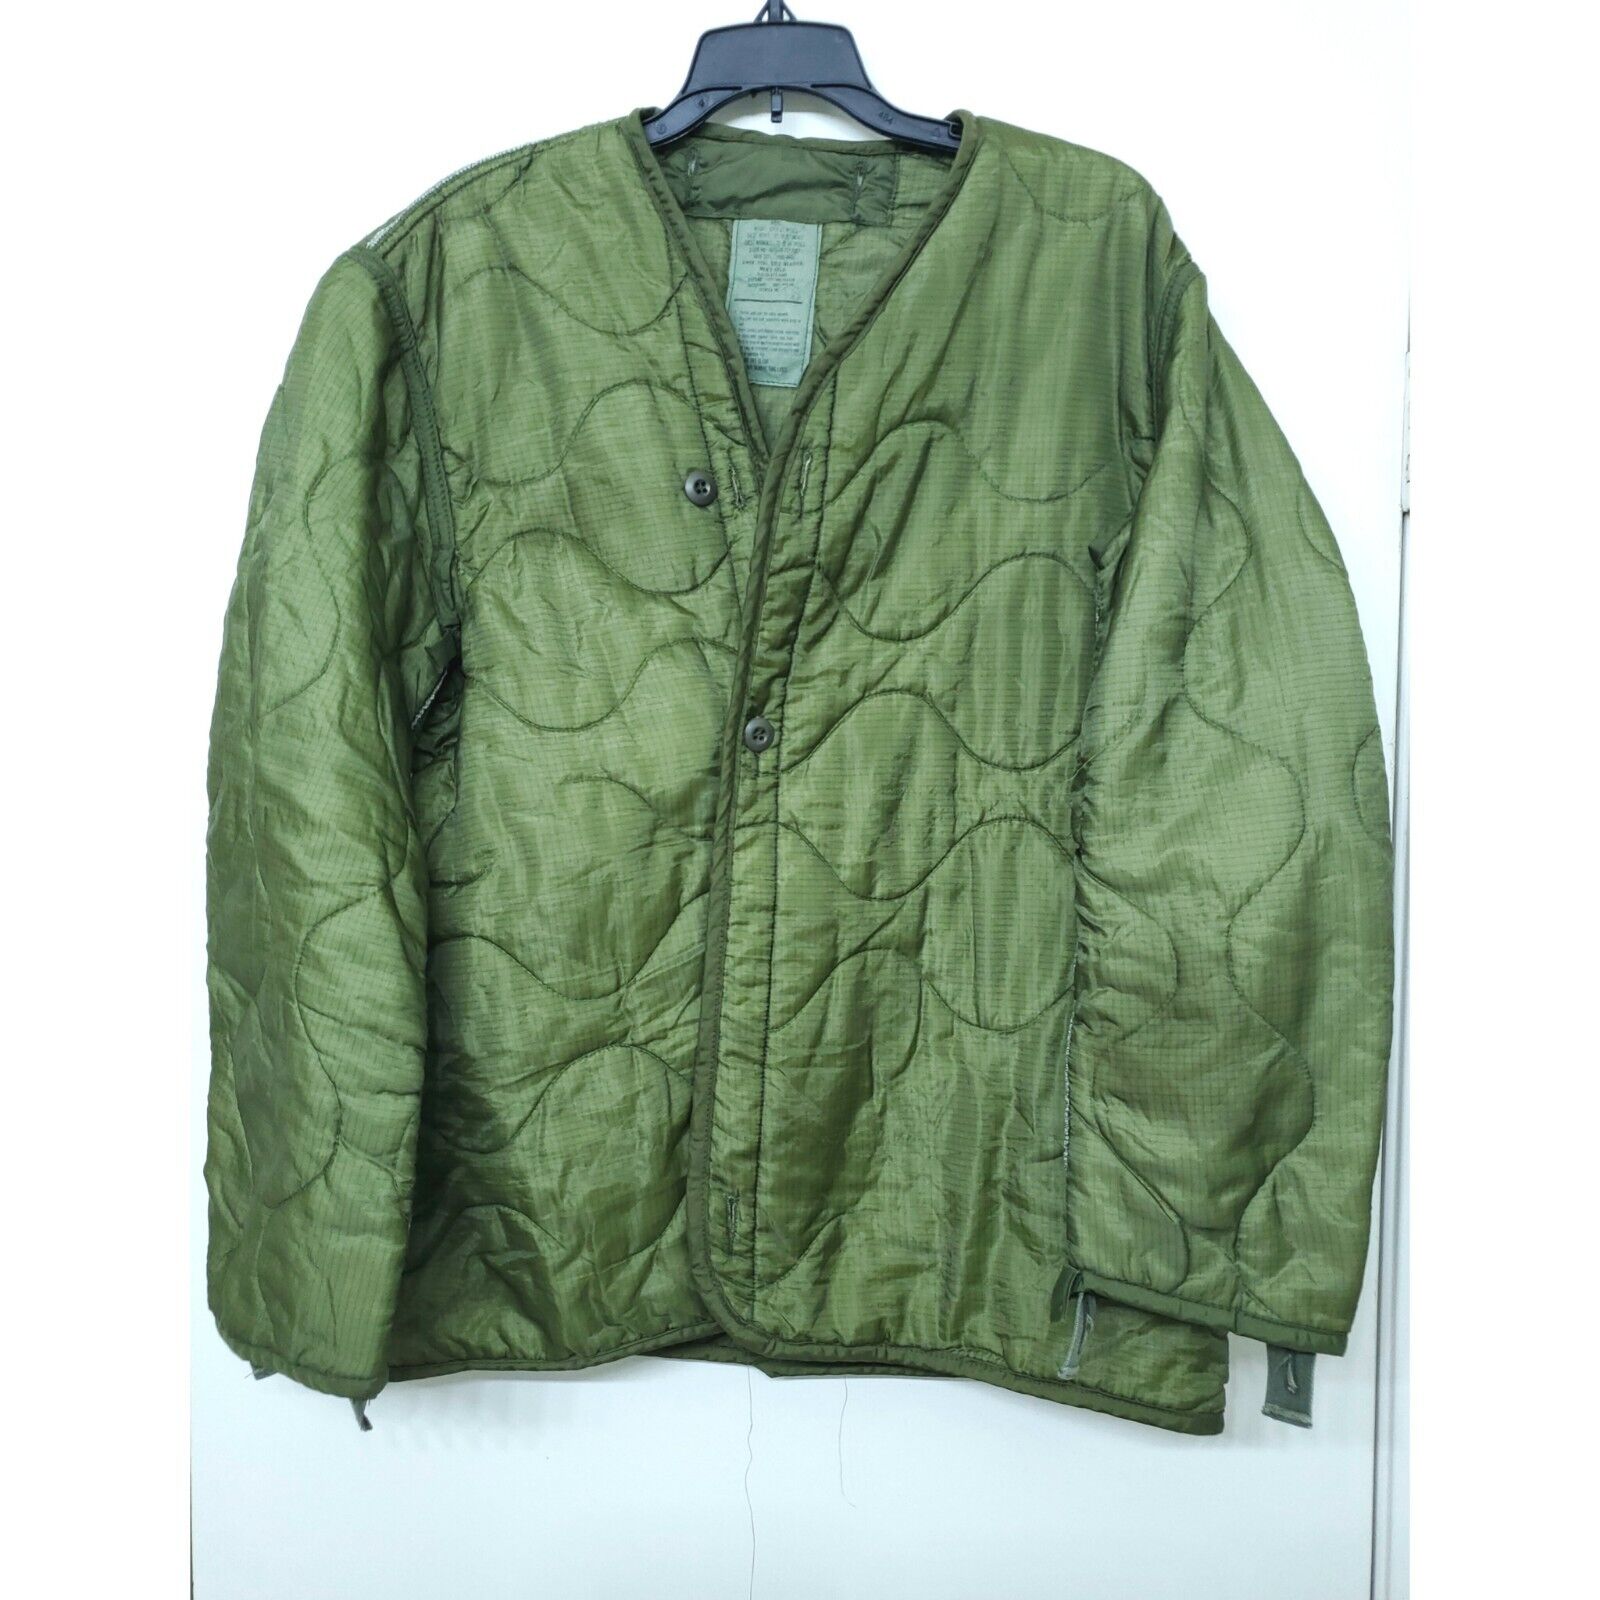 Green US Military Field Jacket Liner Men’s Small - Preowned 8415-00-762-2387